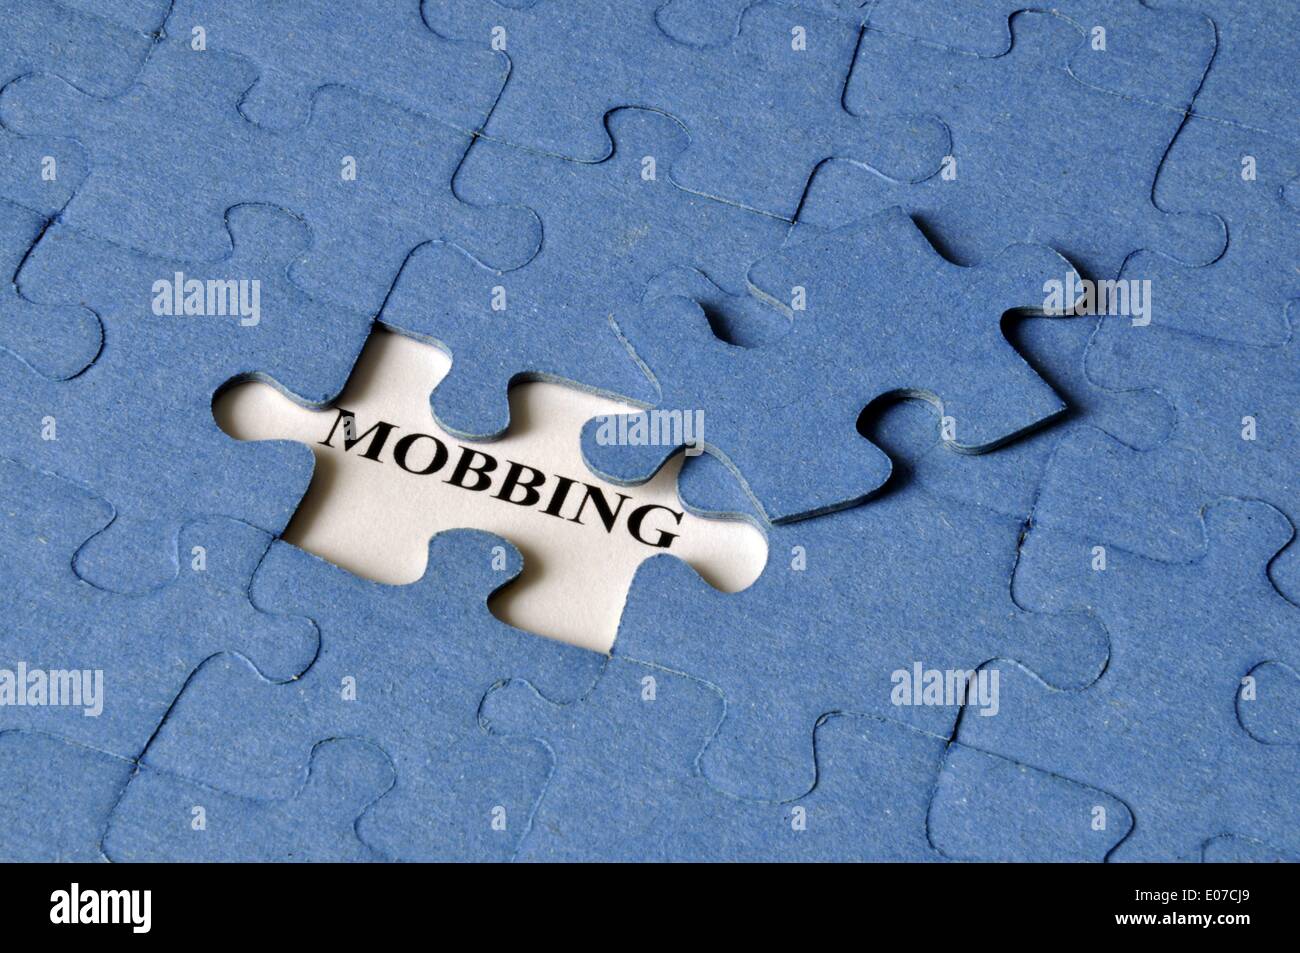 Illustration - The word 'Mobbing' is read under a missing piece of a jigsaw puzzle in Germany, 27 April 2011. Fotoarchiv für ZeitgeschichteS. Steinach - NO WIRE SERVICE Stock Photo